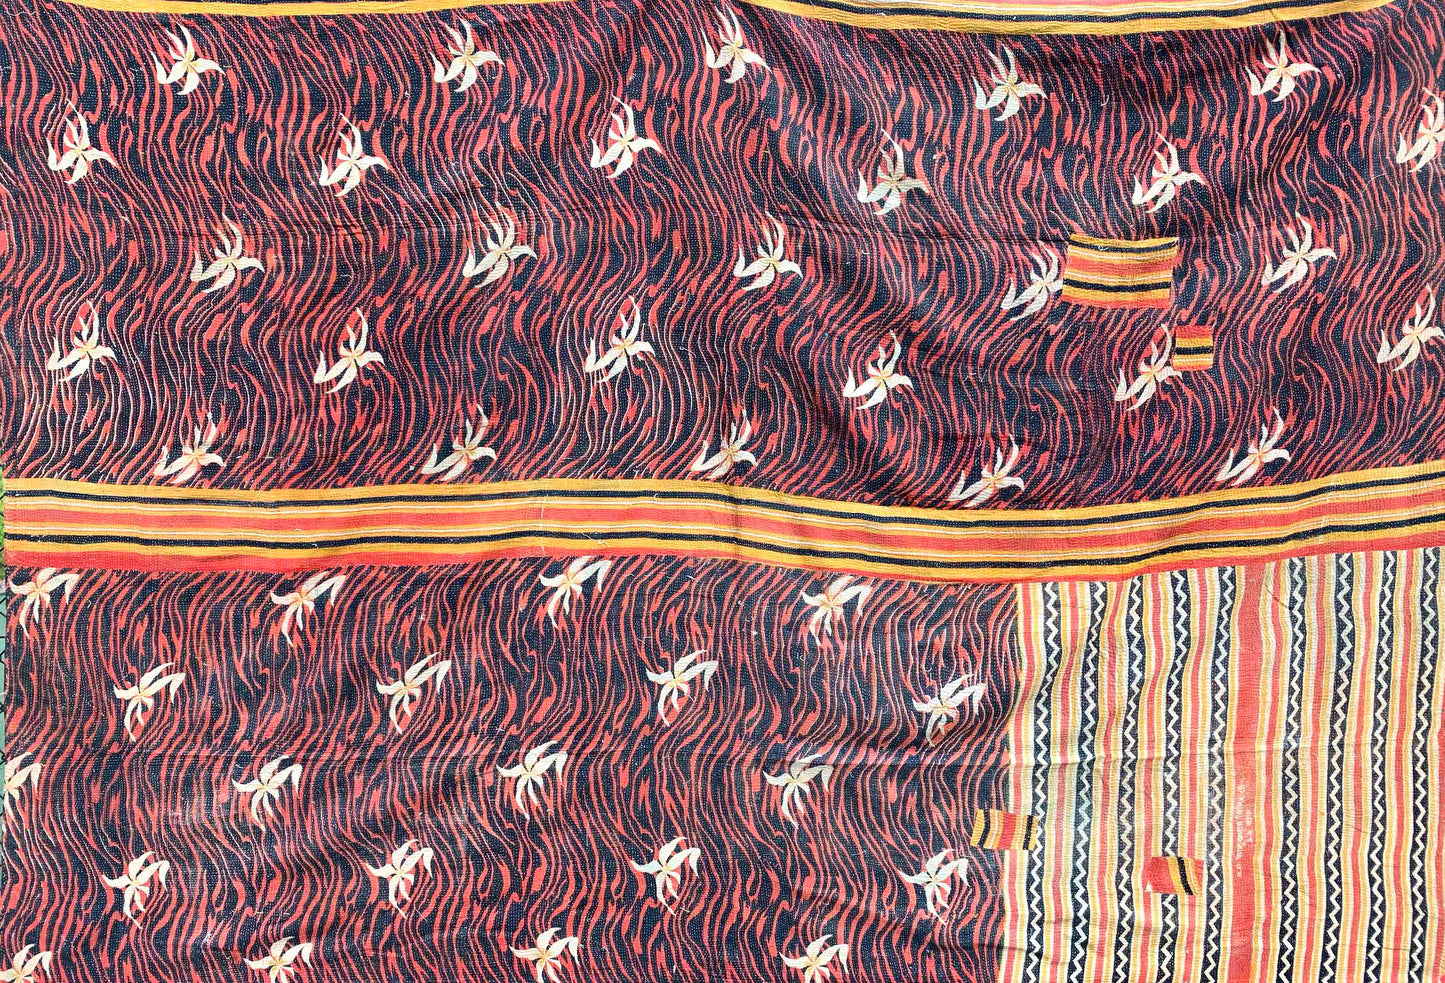 Red, black and yellow kantha